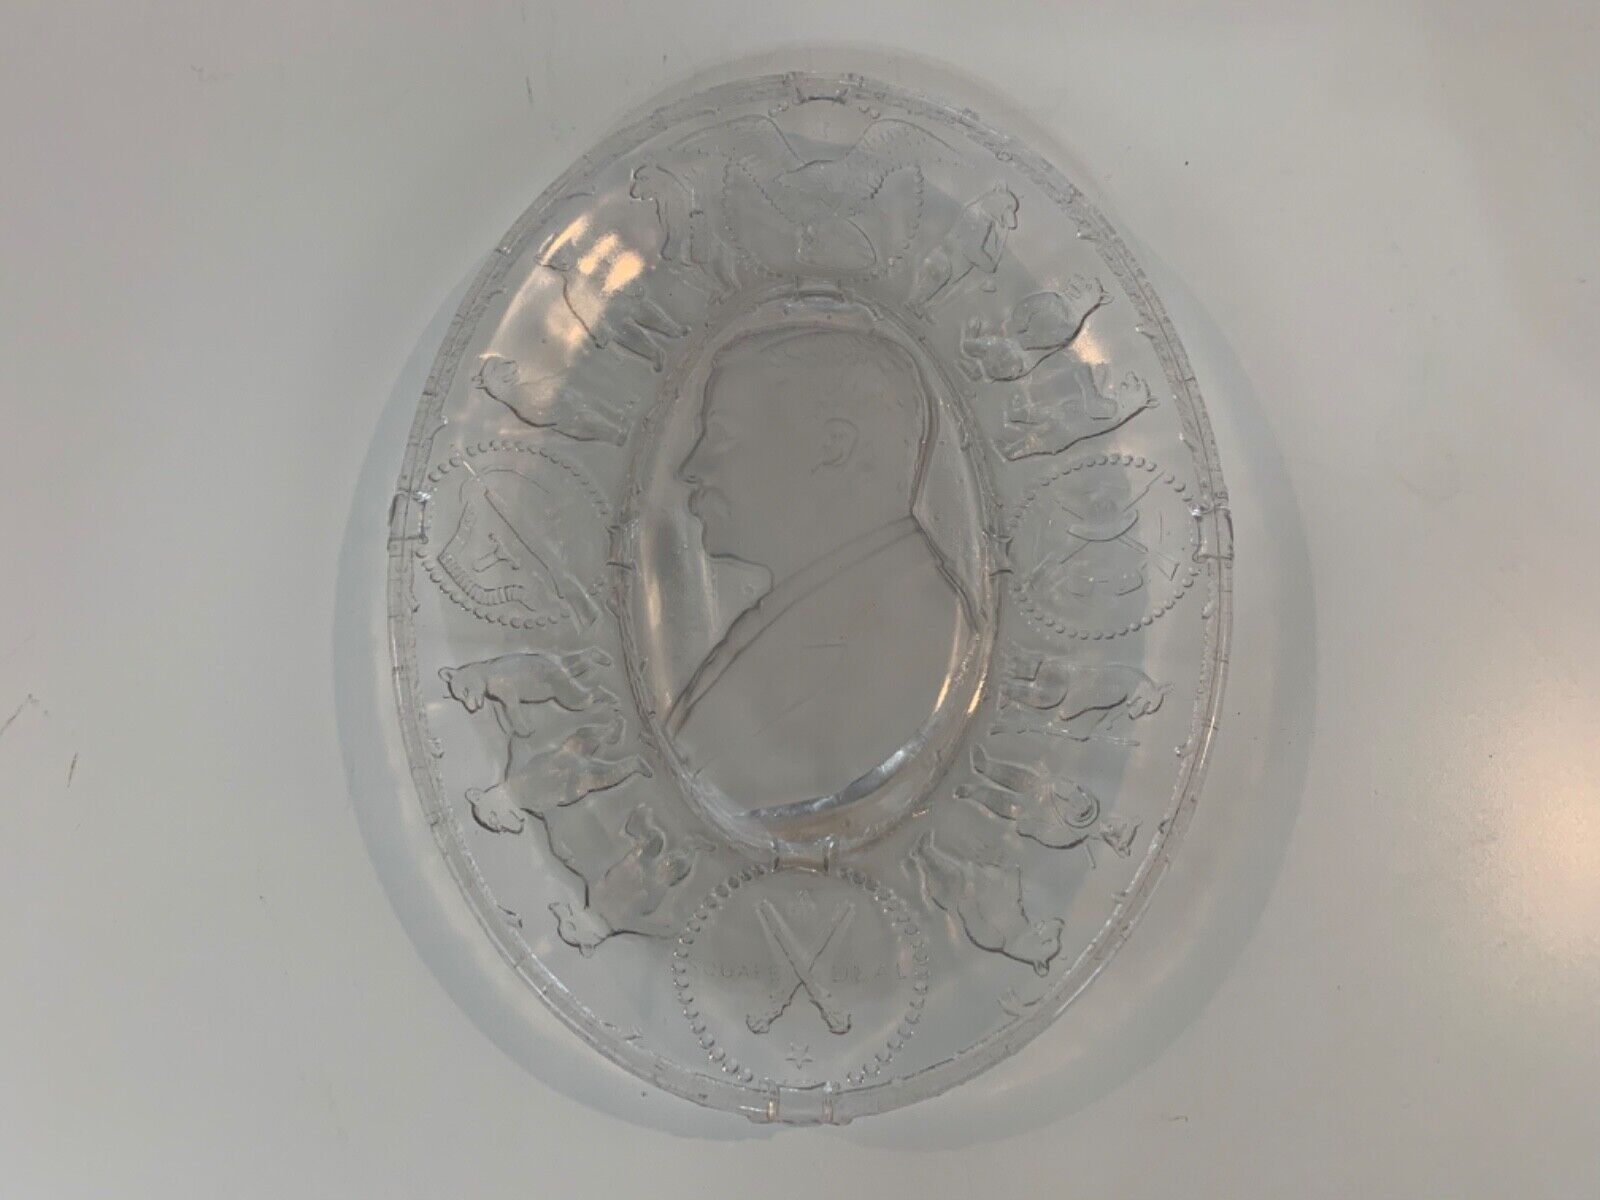 Antique Theodore Roosevelt “A Square Deal” Clear Glass Tray / Platter